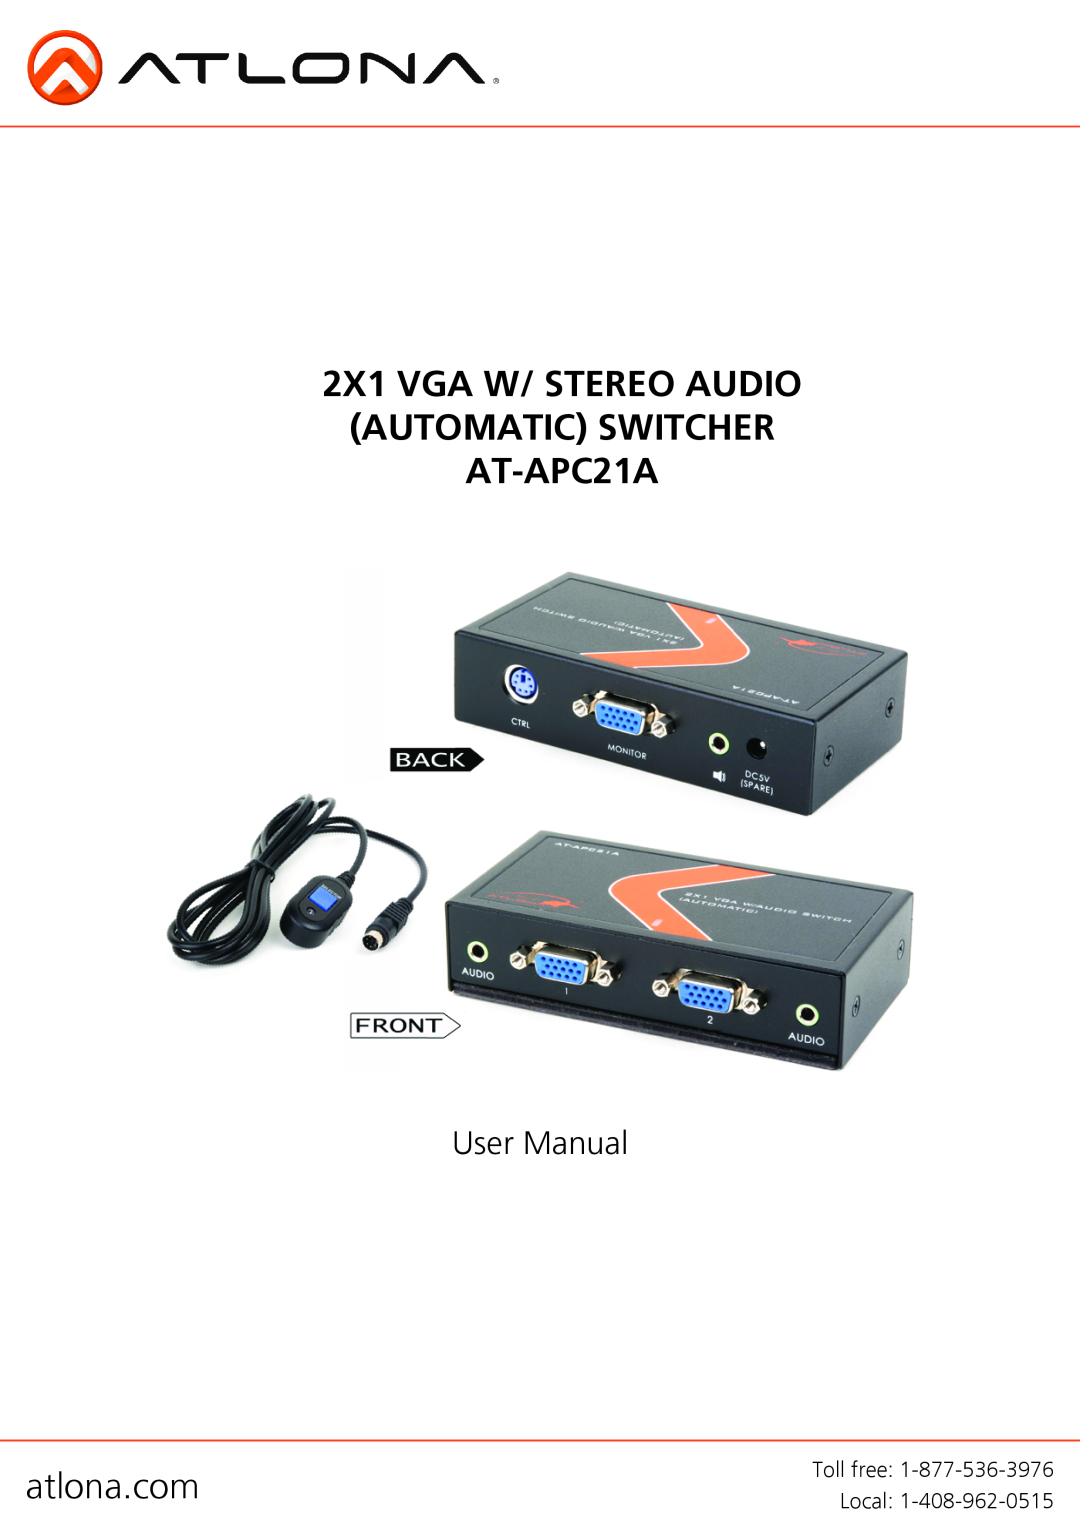 Atlona AT-APC21A user manual 2X1 VGA W/ STEREO AUDIO AUTOMATIC SWITCHER 